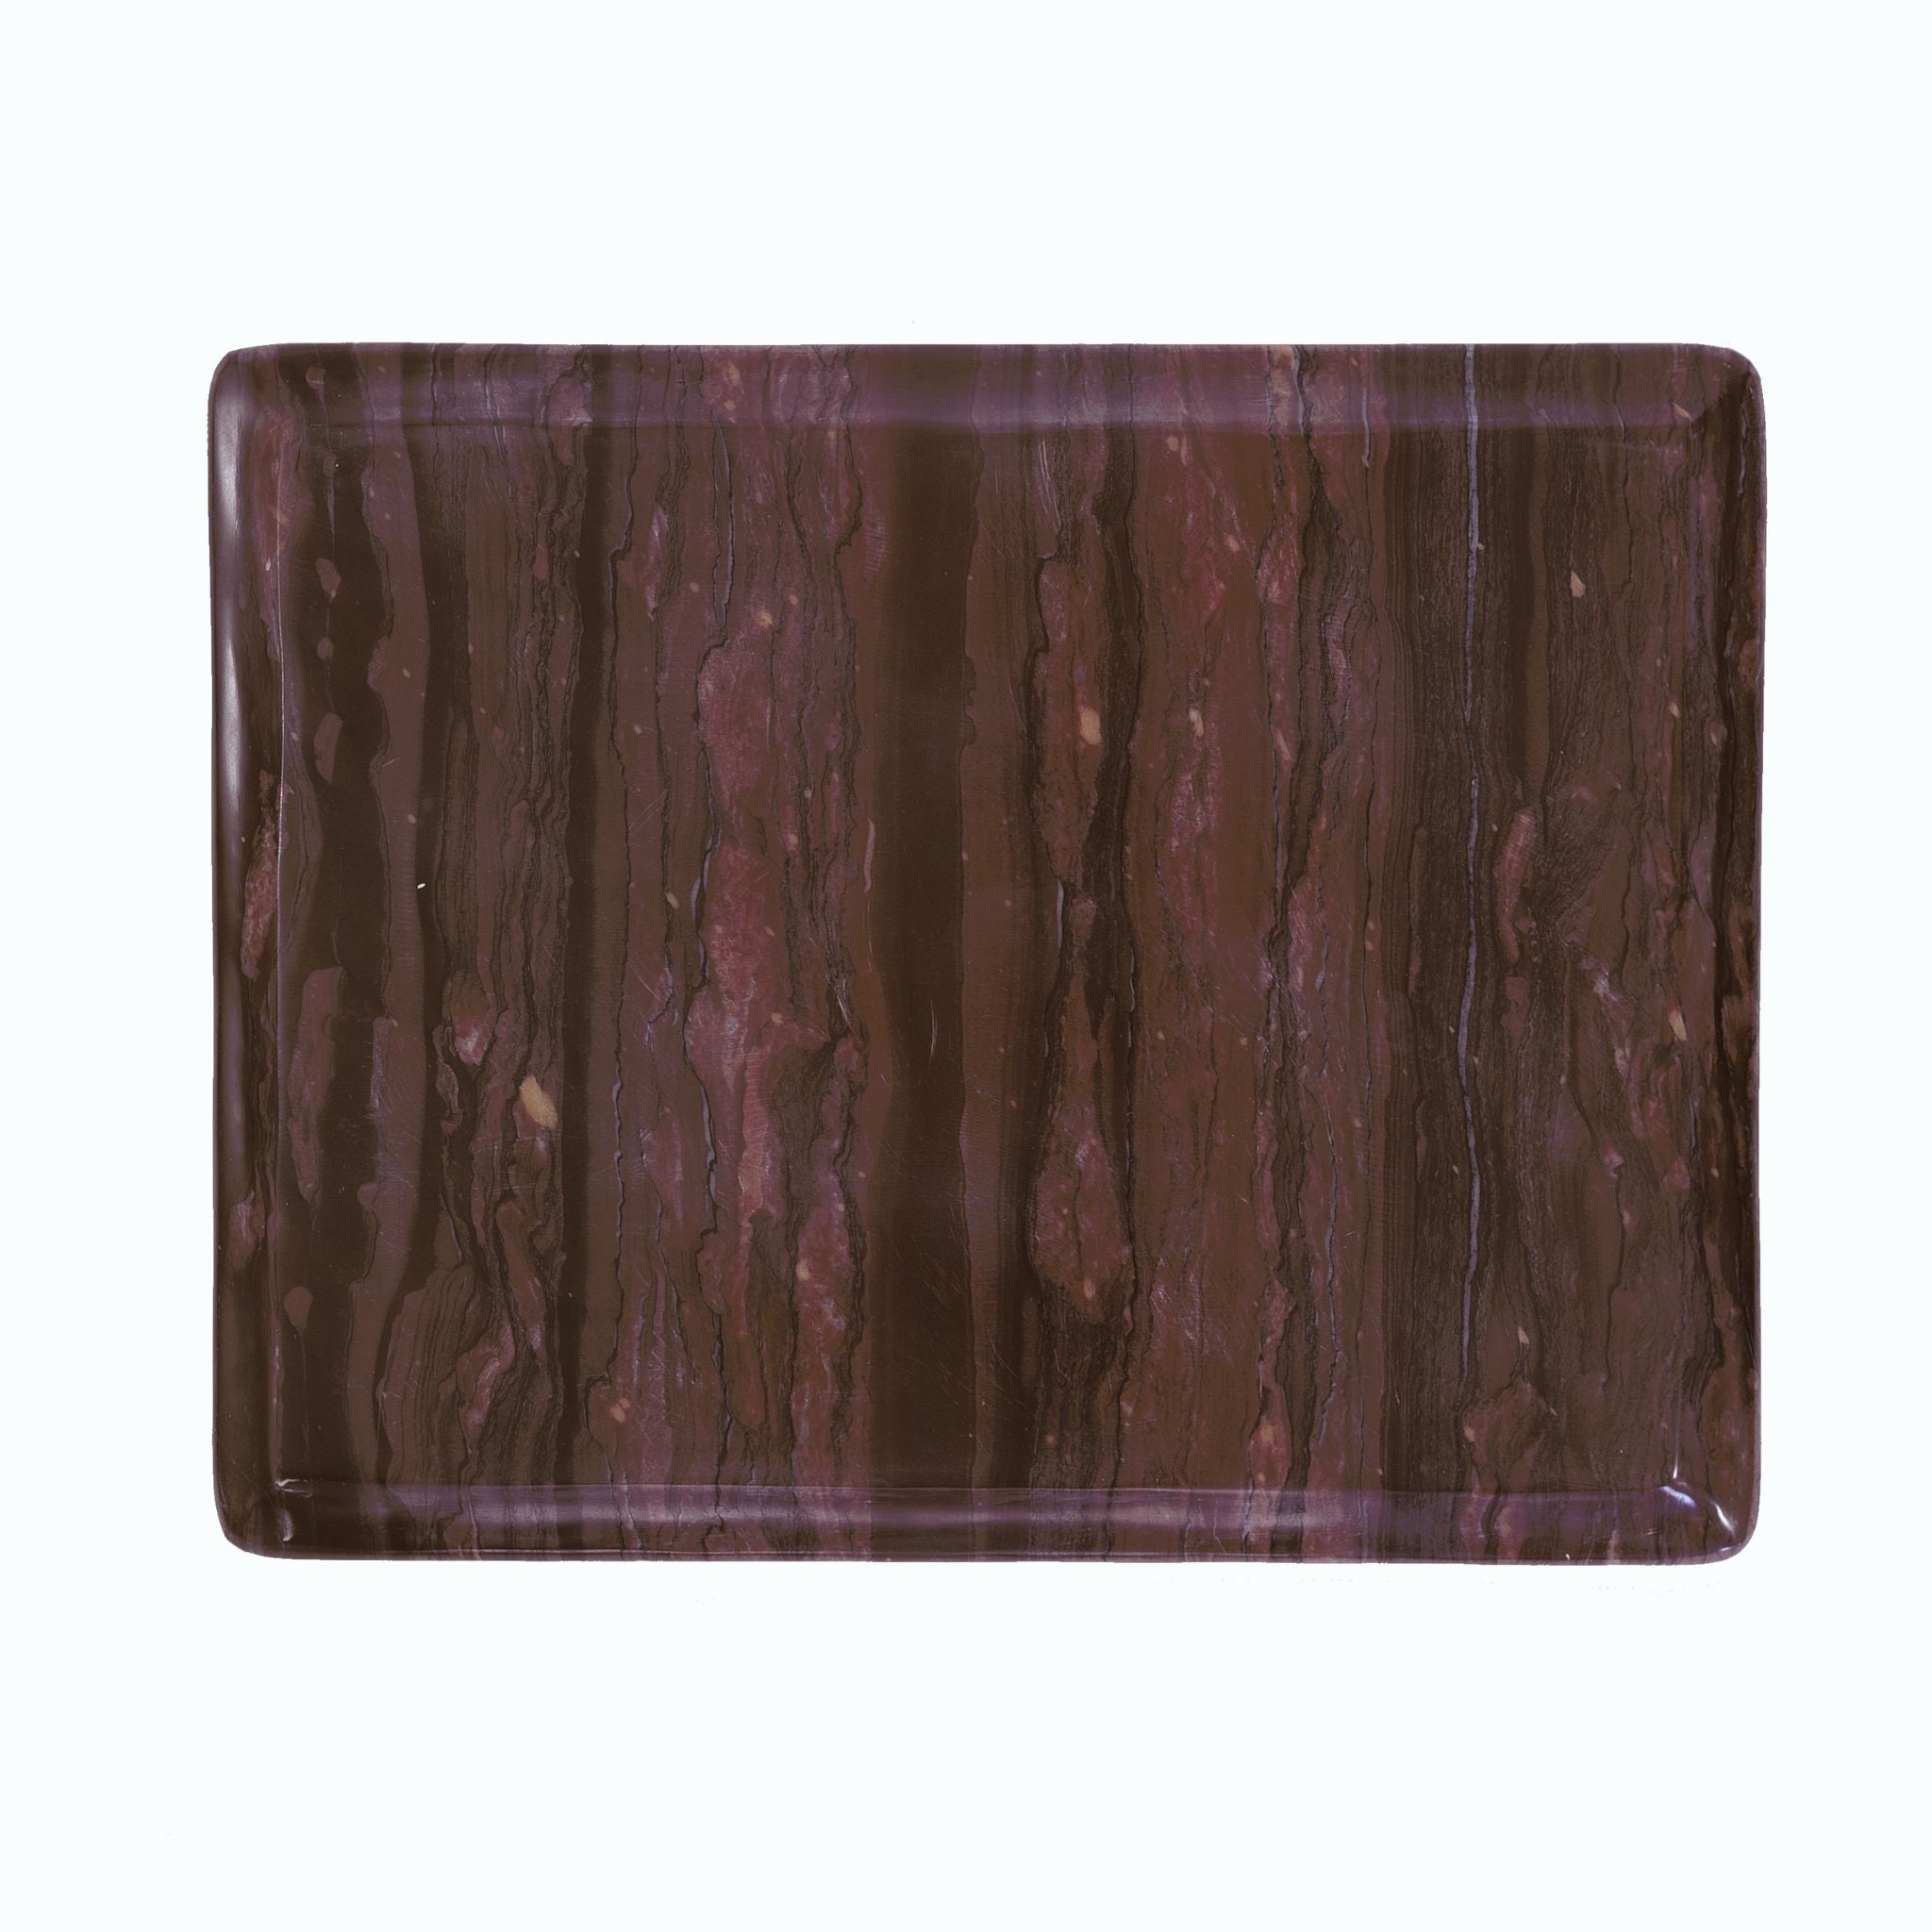 RED MARBLE OGEE SLAB - SIMPLY ELEVATED HOME FURNISHING 